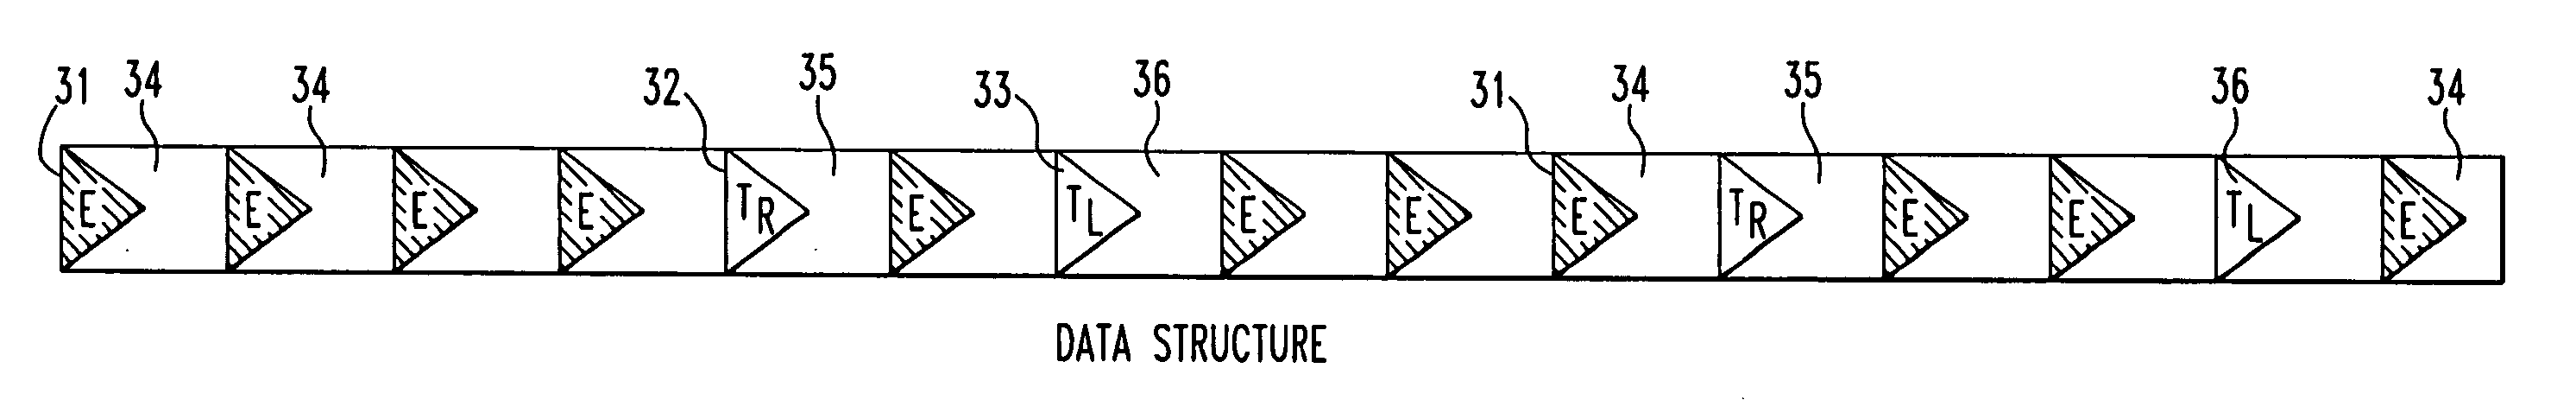 Method for obtaining and processing surface analysis data